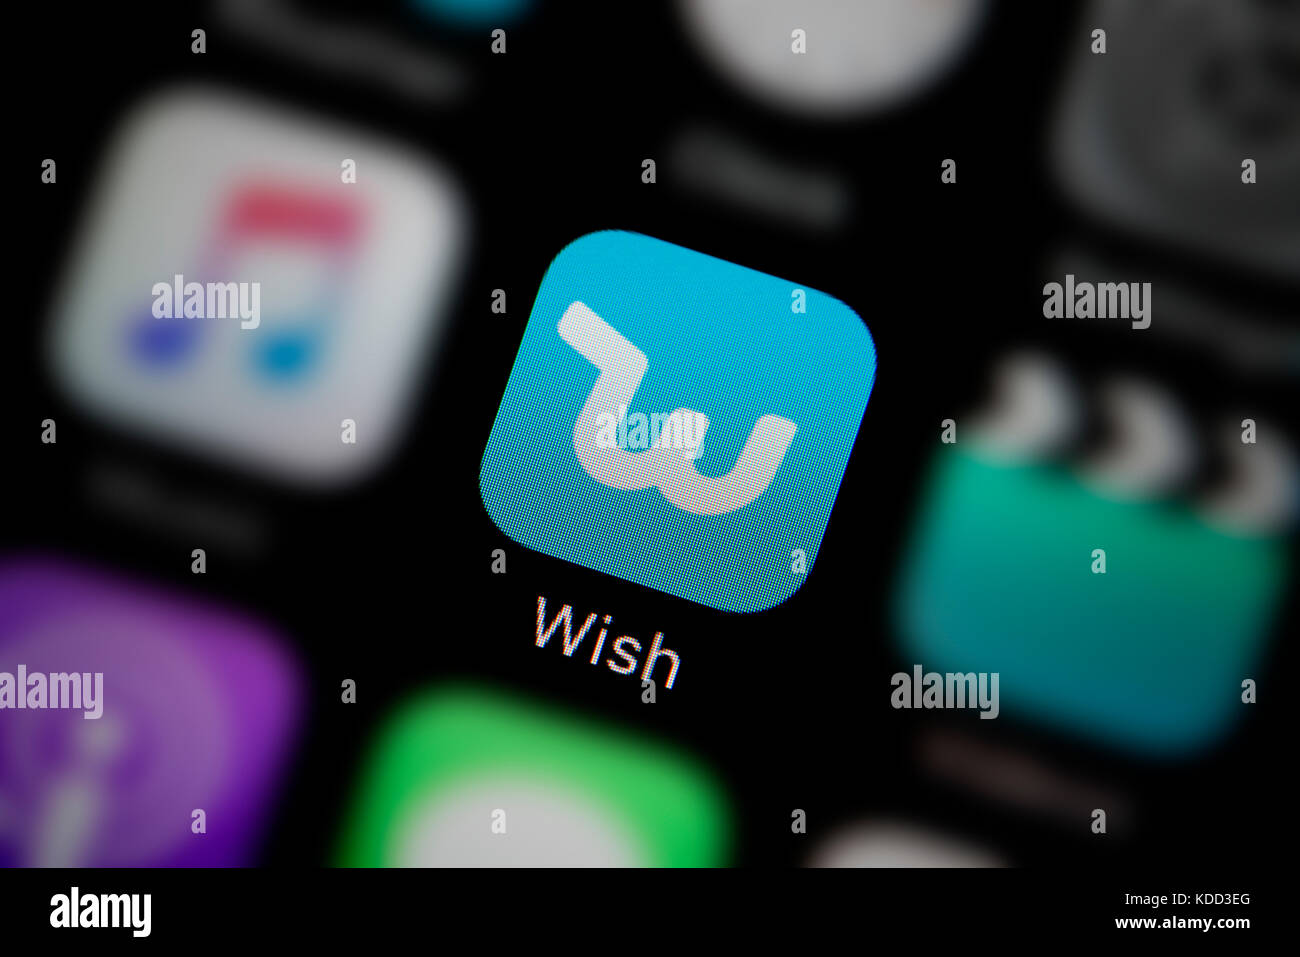 A close-up shot of the logo representing the Wish app icon, as seen on the screen of a smart phone (Editorial use only) Stock Photo